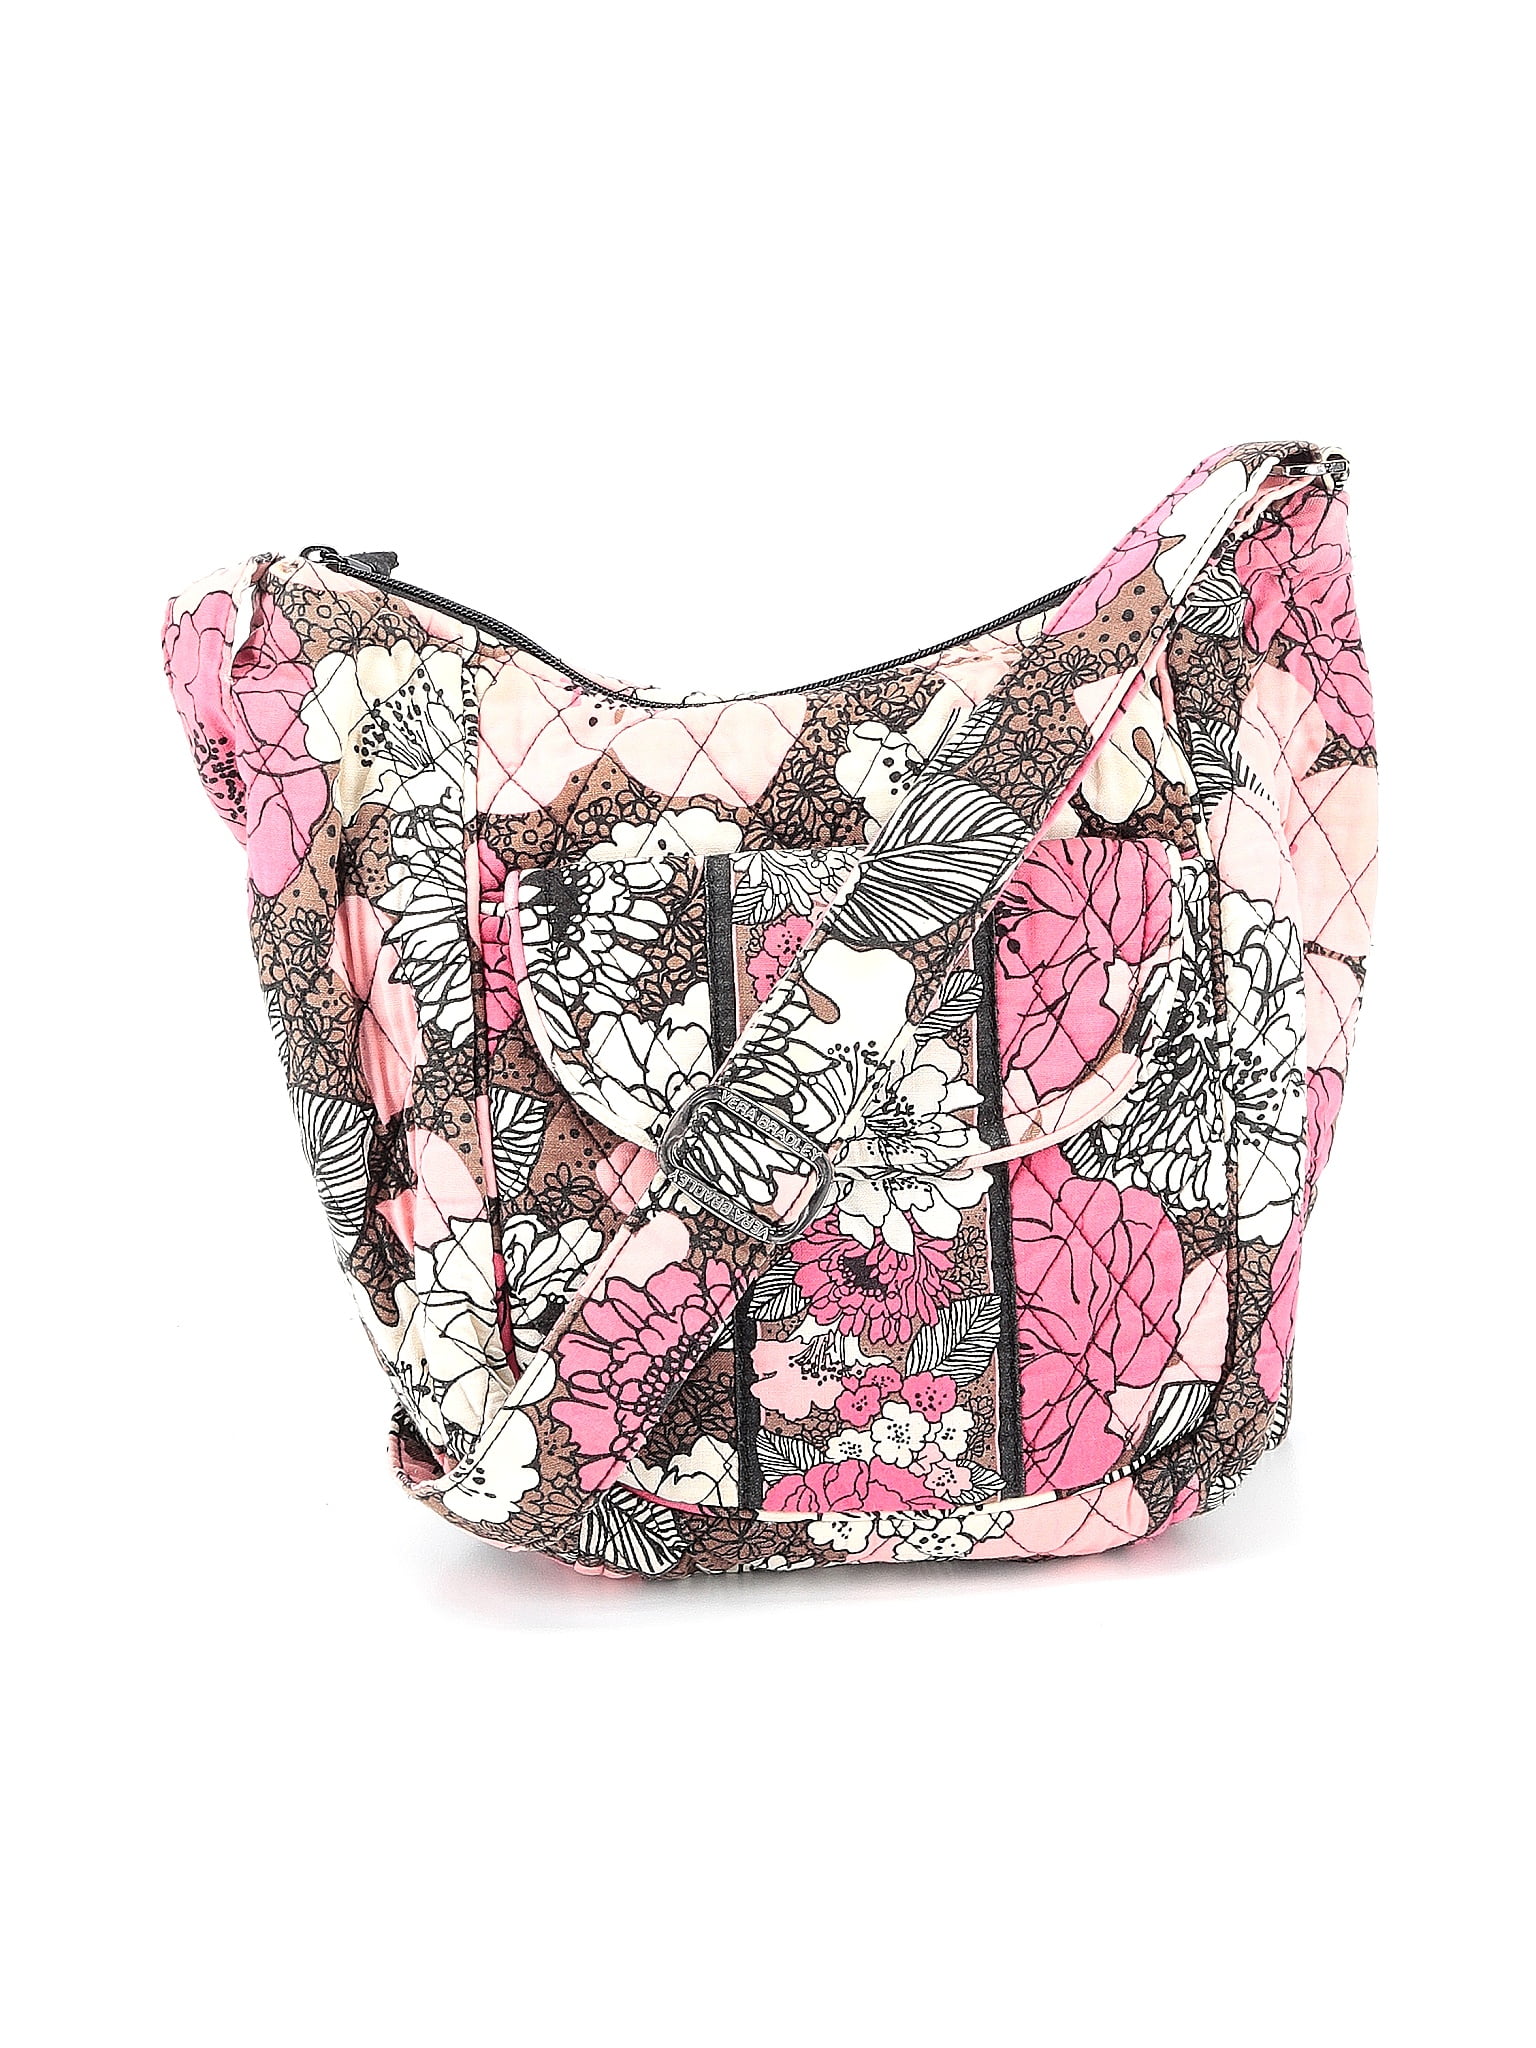 Get 25% off Vera Bradley bags, totes and crossbodies